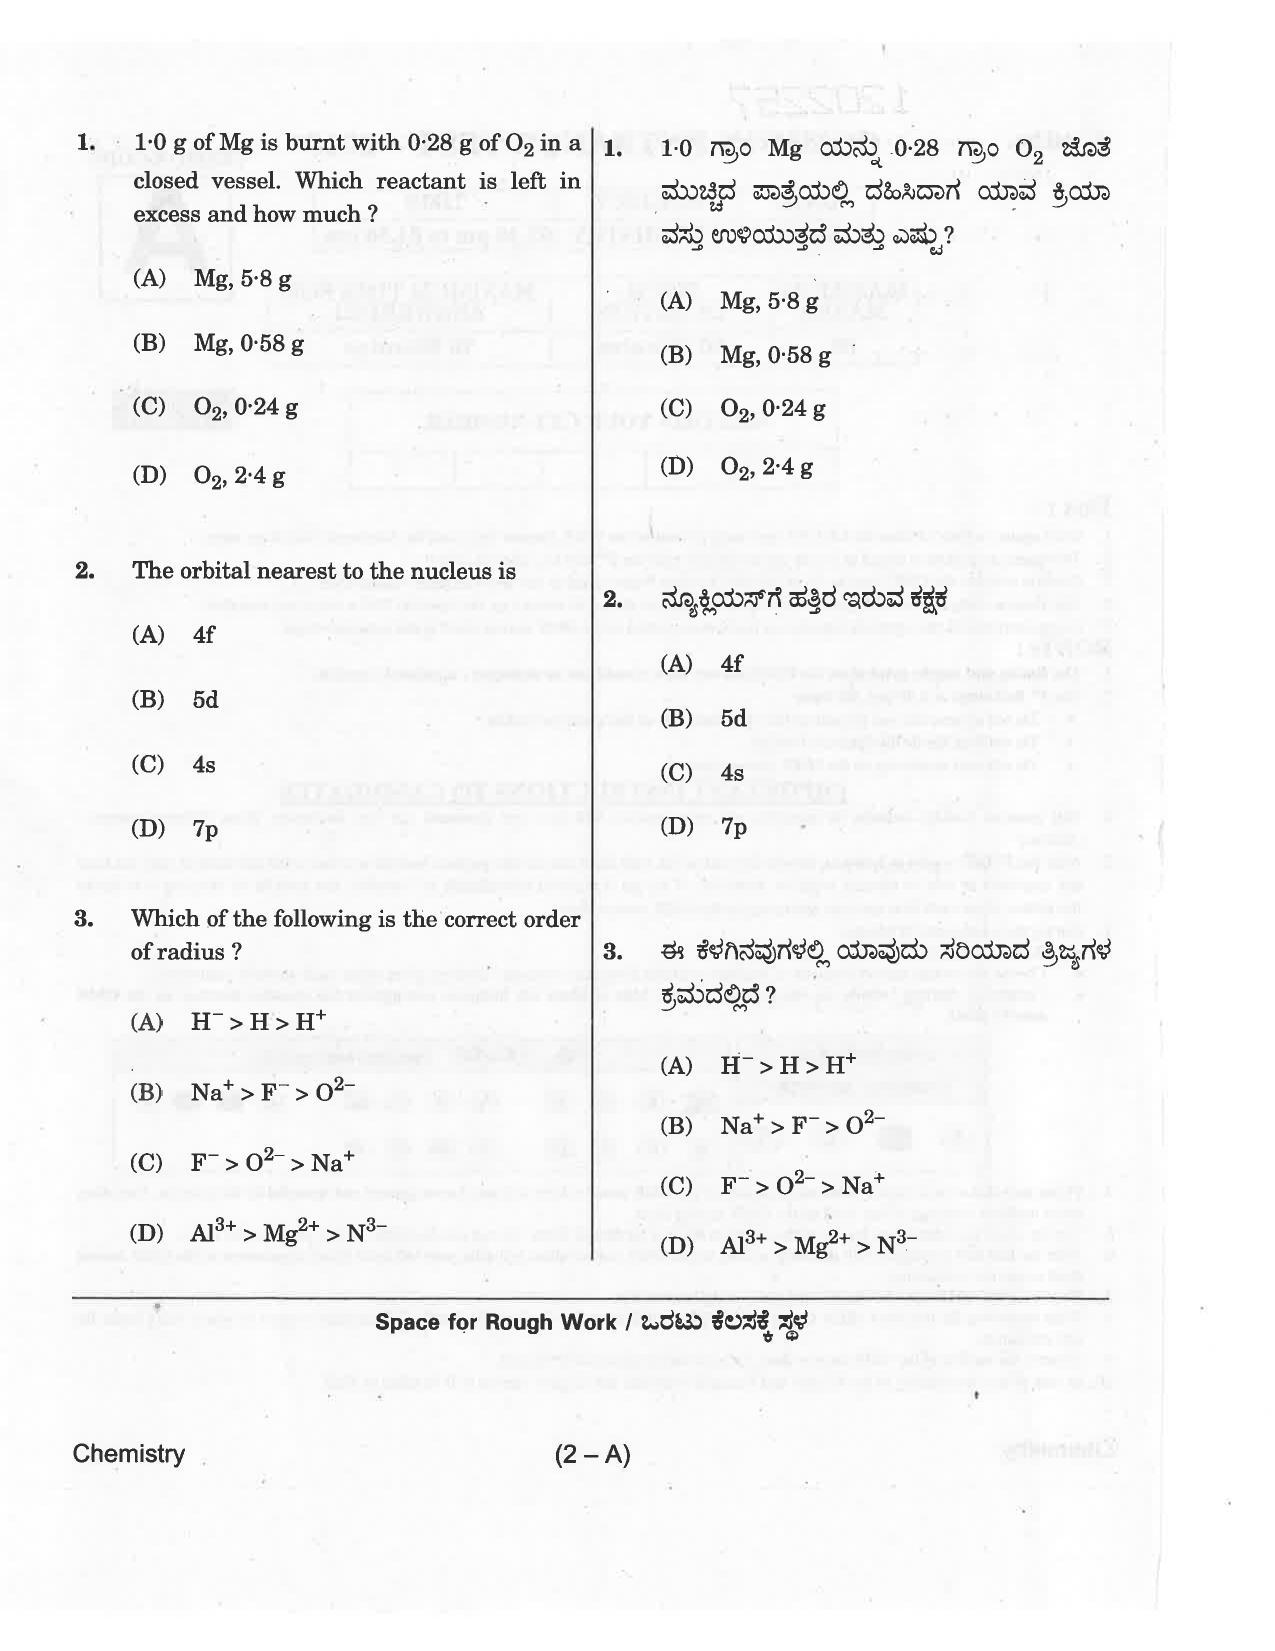 KCET Chemistry 2018 Question Papers - Page 2